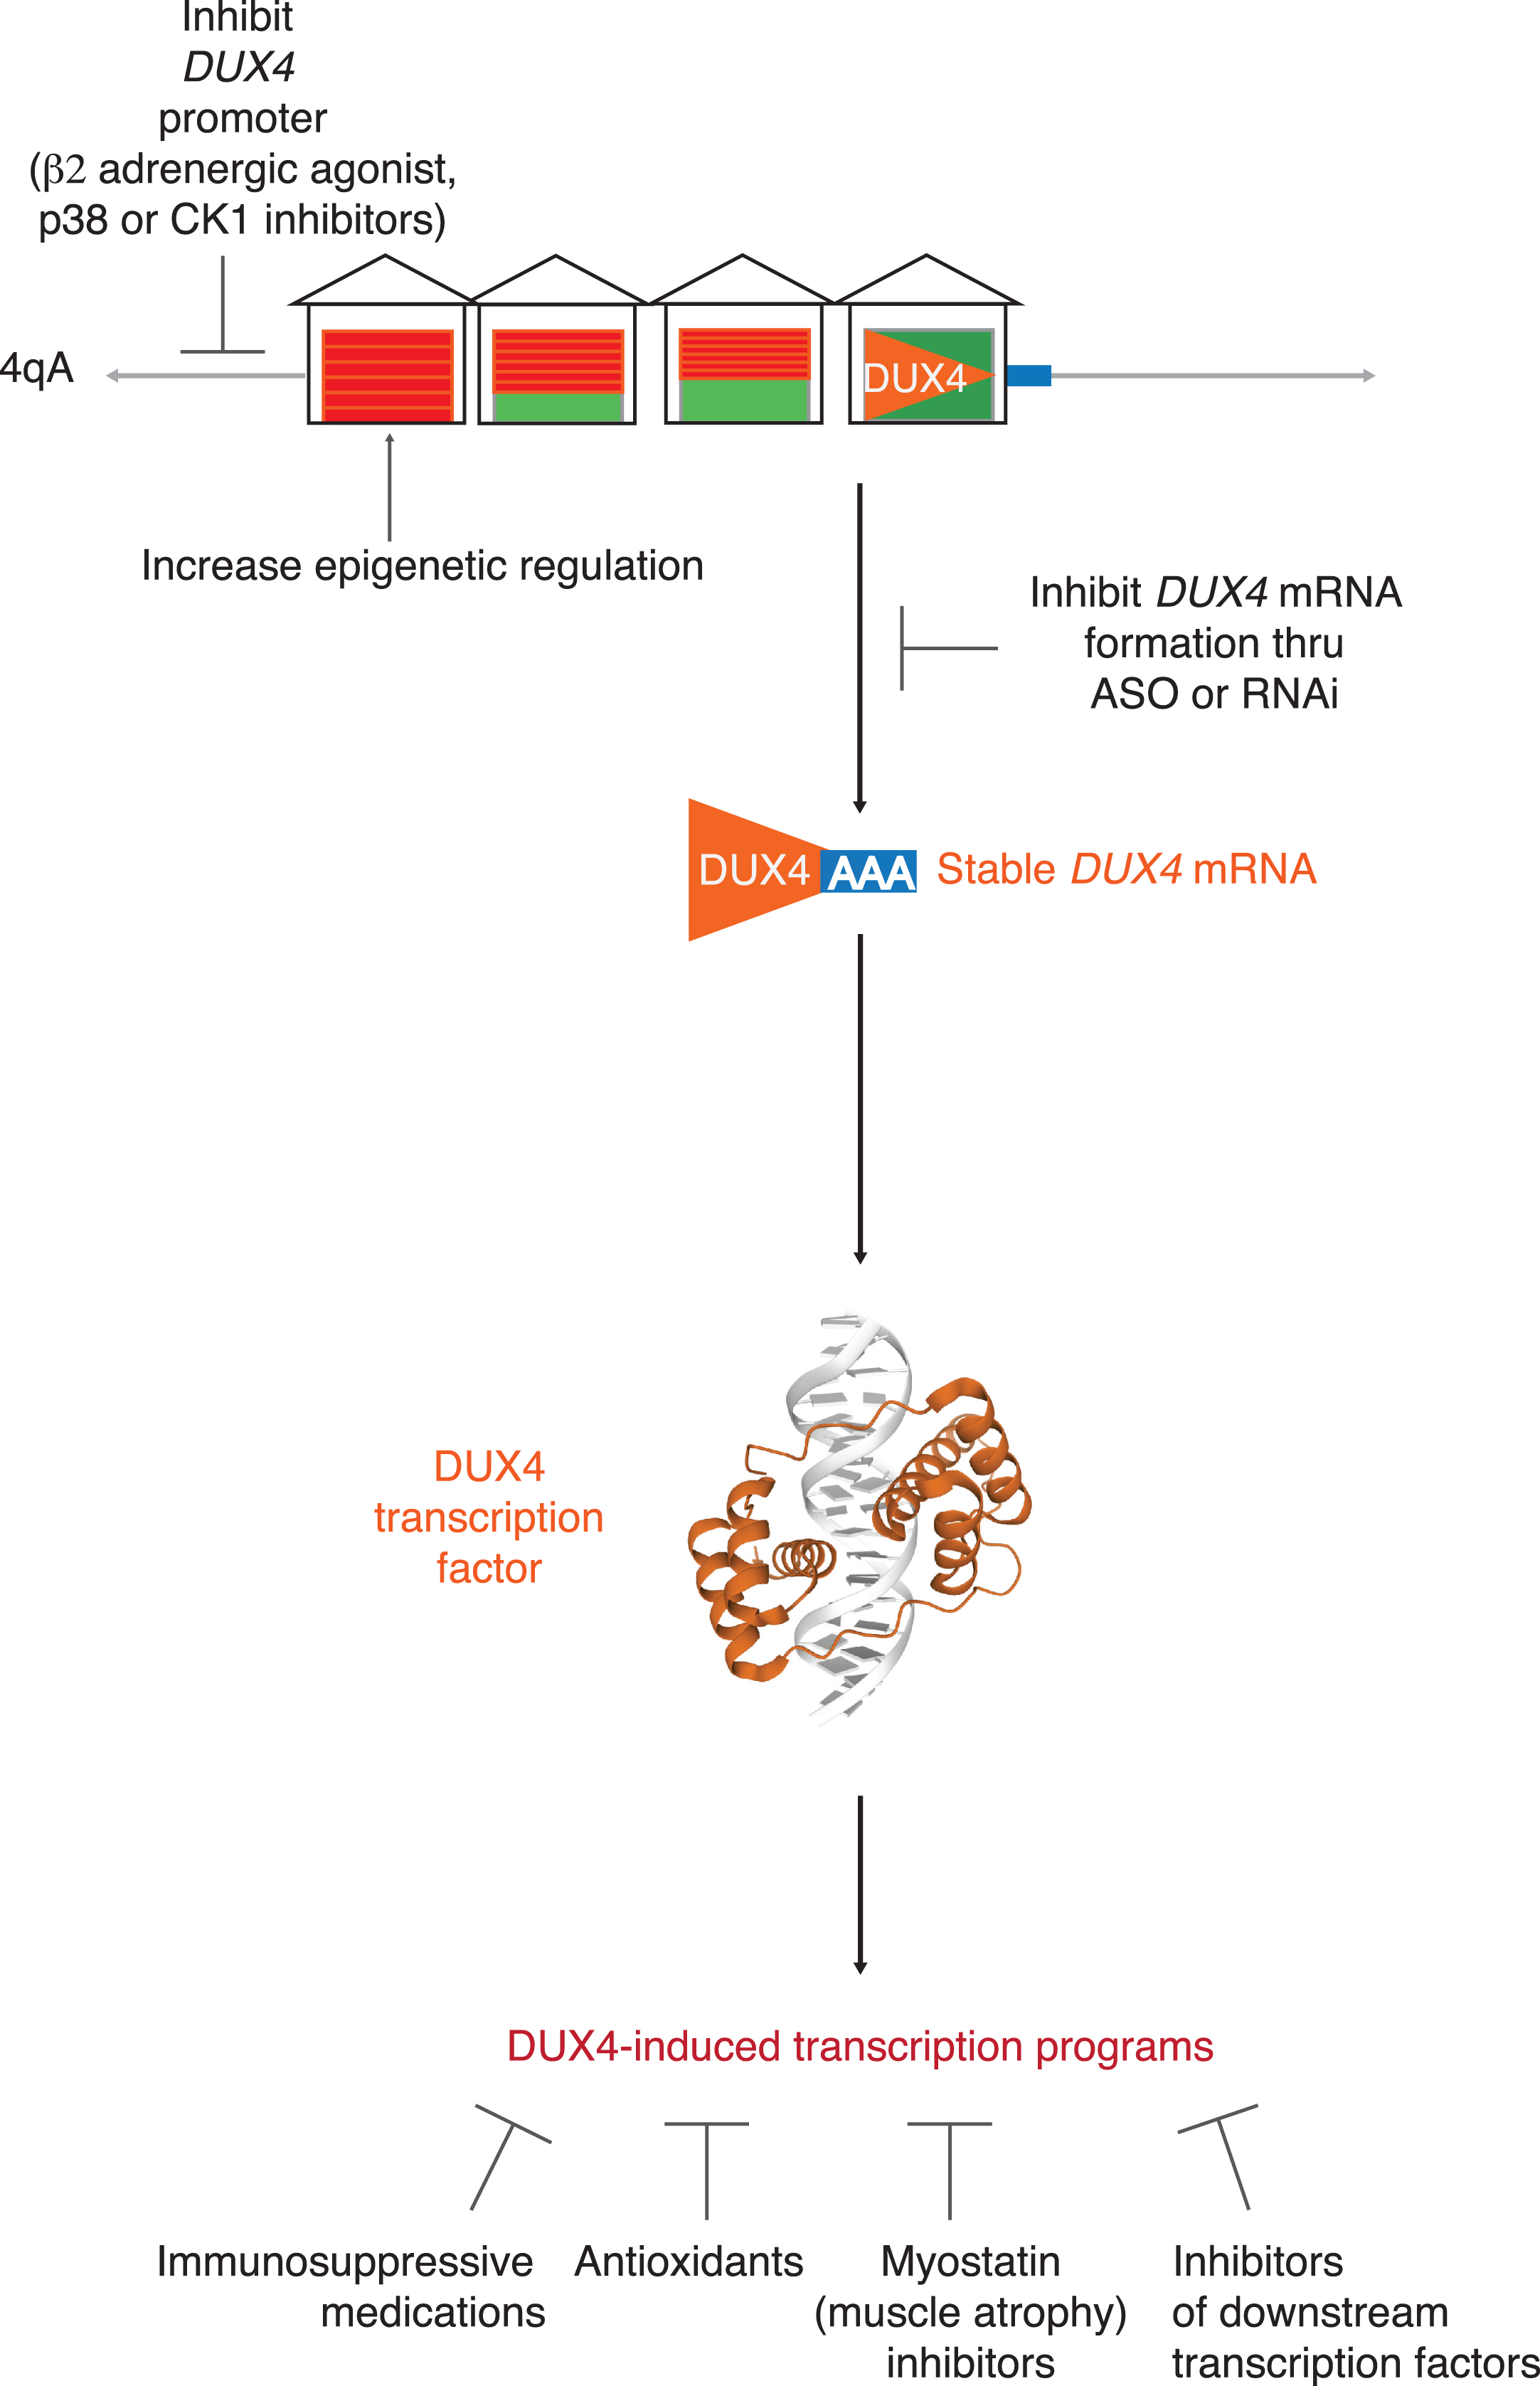 Targeting DUX4. Possible targeted therapeutic approaches to FSHD include: 1) epigenetic silencing of the D4Z4 repeats; 2) blocking DUX4 mRNA production by inhibiting DUX4 promoter or DUX4 mRNA formation; 3) targeting one of several identified downstream pathologic pathways triggered by DUX4 expression.